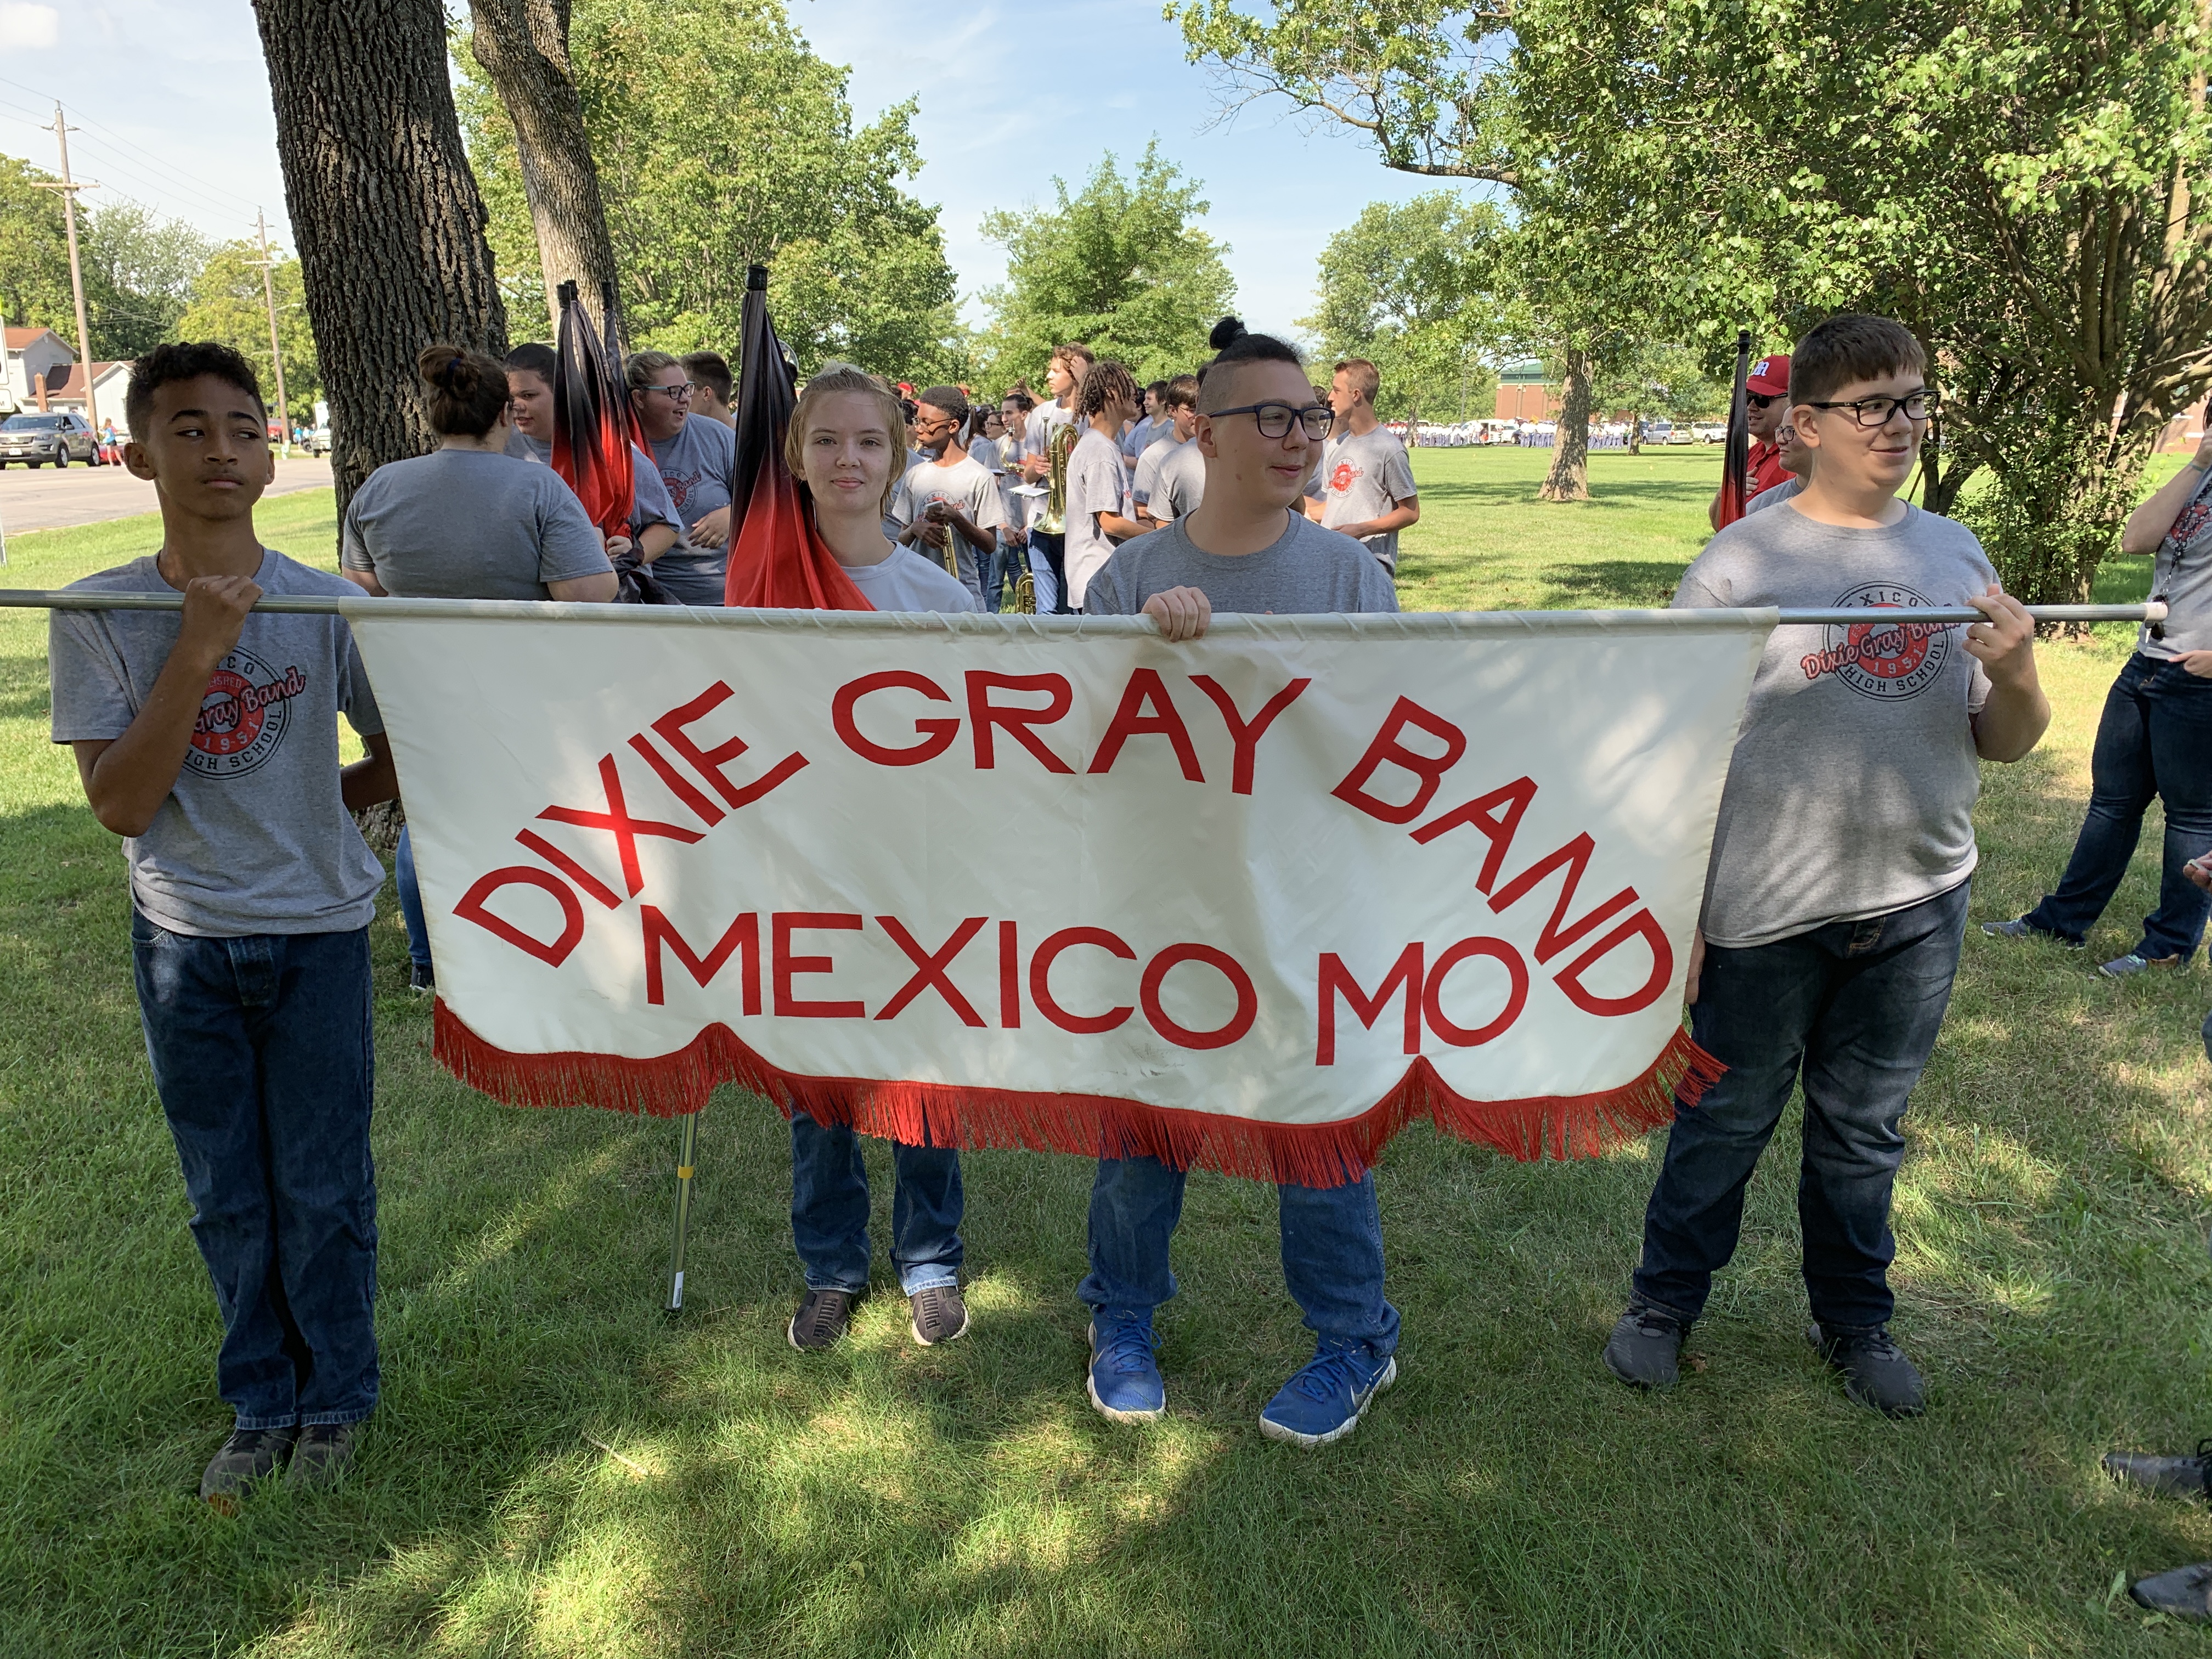 Two Online Petitions Started Over The Name Of The Mexico High School Dixie Gray Band